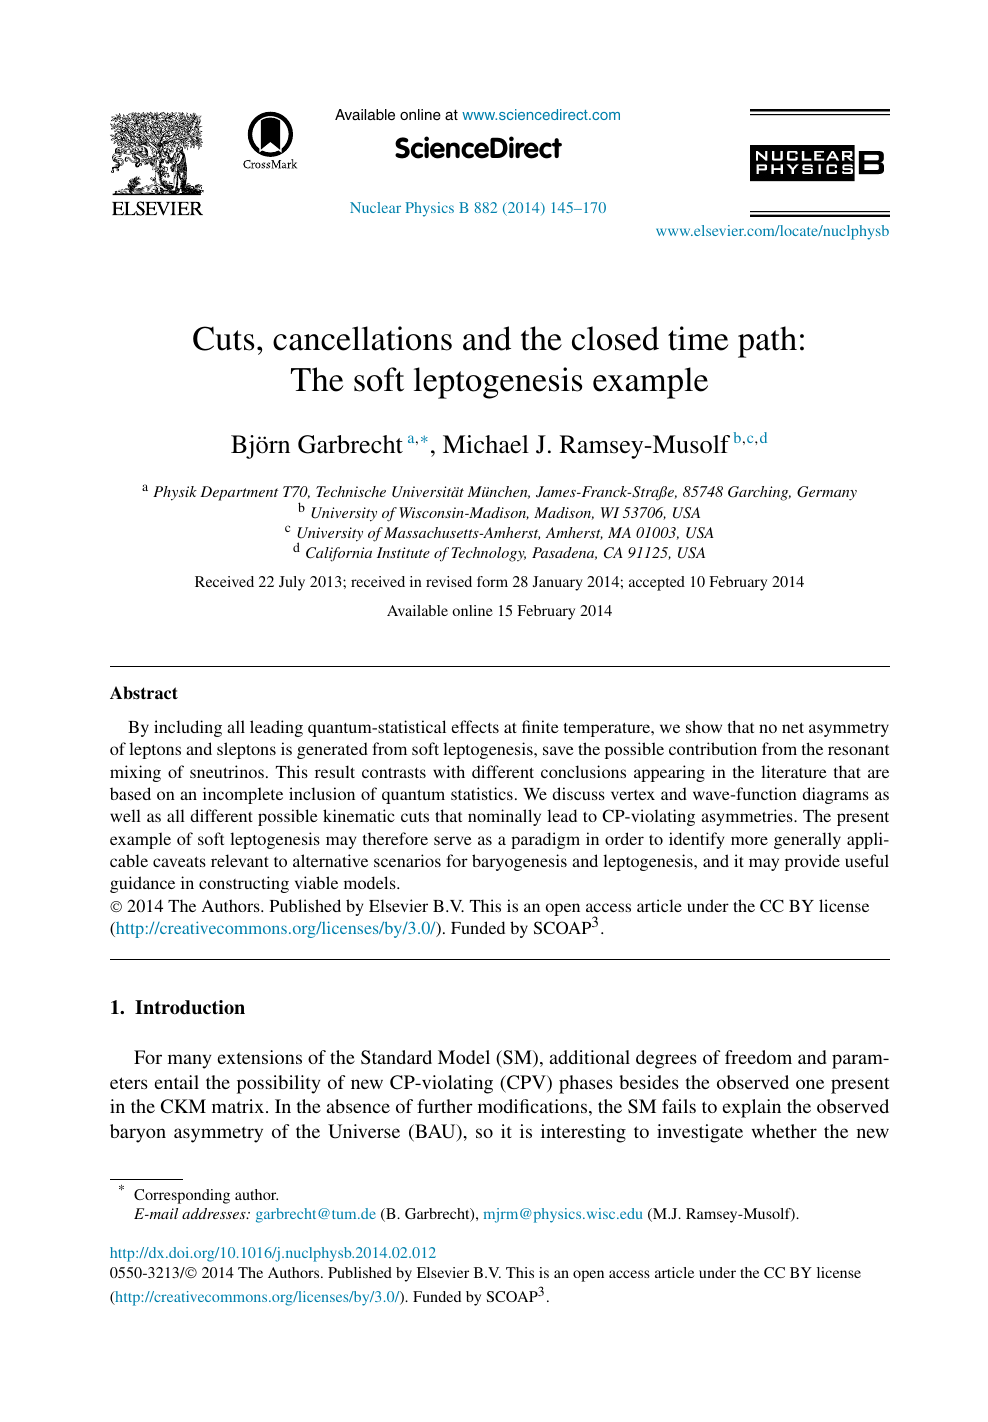 Cuts Cancellations And The Closed Time Path The Soft Leptogenesis Example Topic Of Research Paper In Physical Sciences Download Scholarly Article Pdf And Read For Free On Cyberleninka Open Science Hub